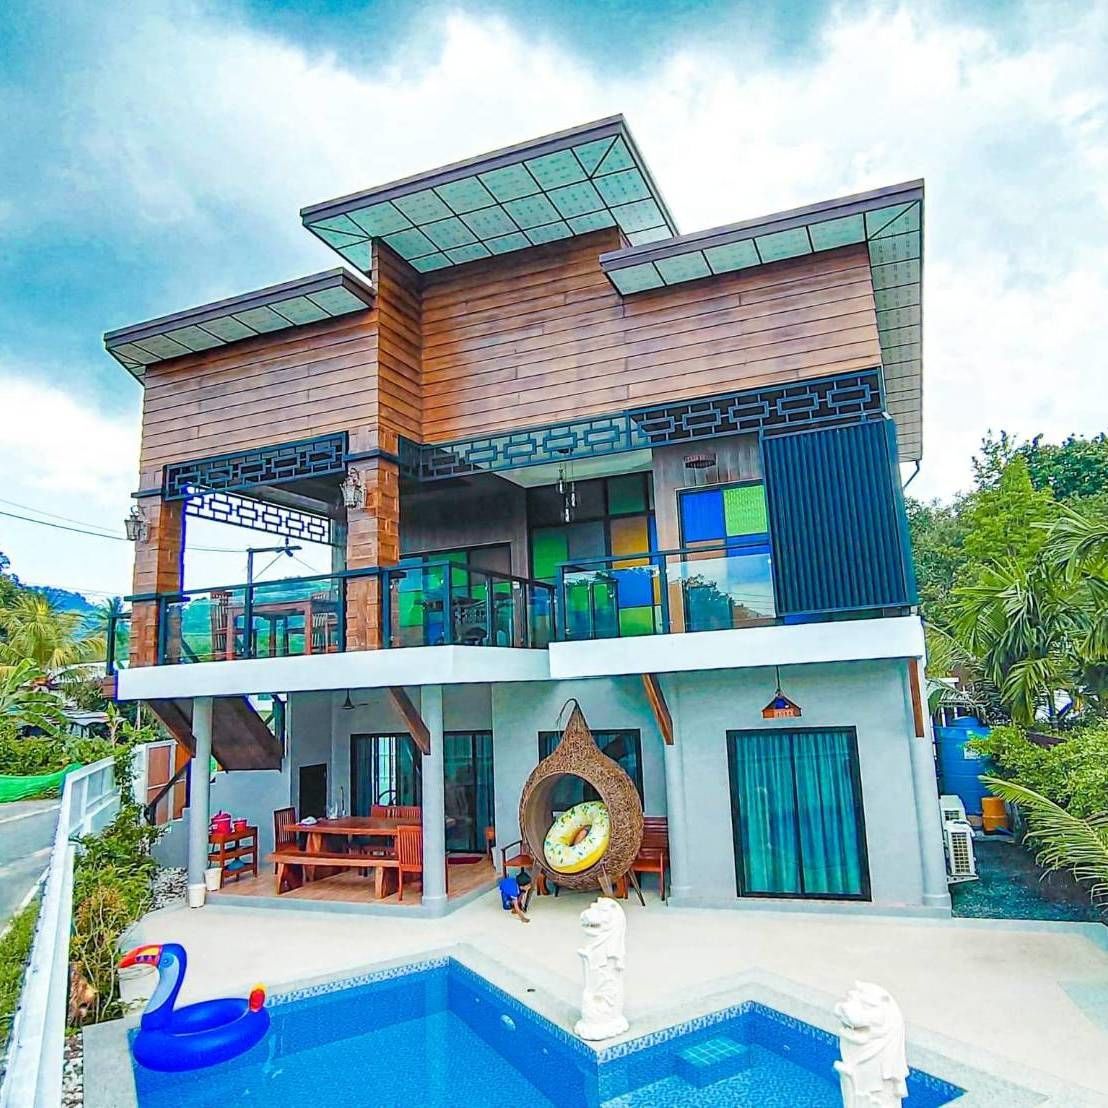 3 Bedrooms House with private pool. Located near UWC international school, Thalang, Phuket